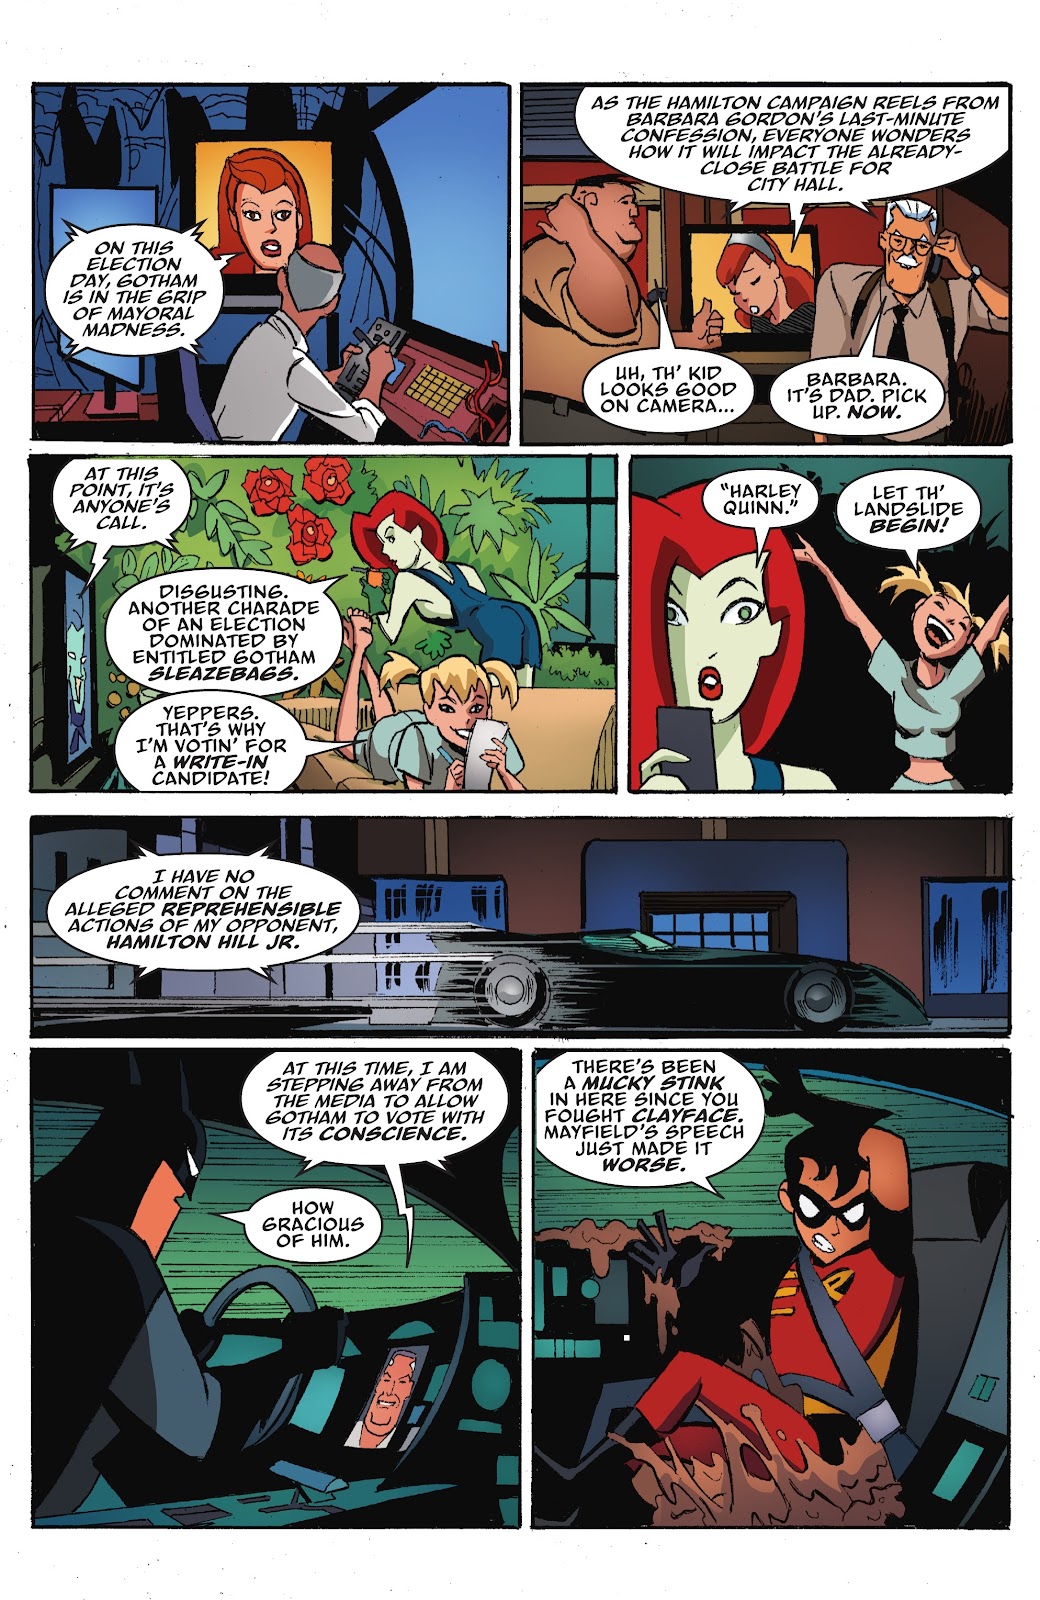 Batman: The Adventures Continue: Season Two issue 7 - Page 13